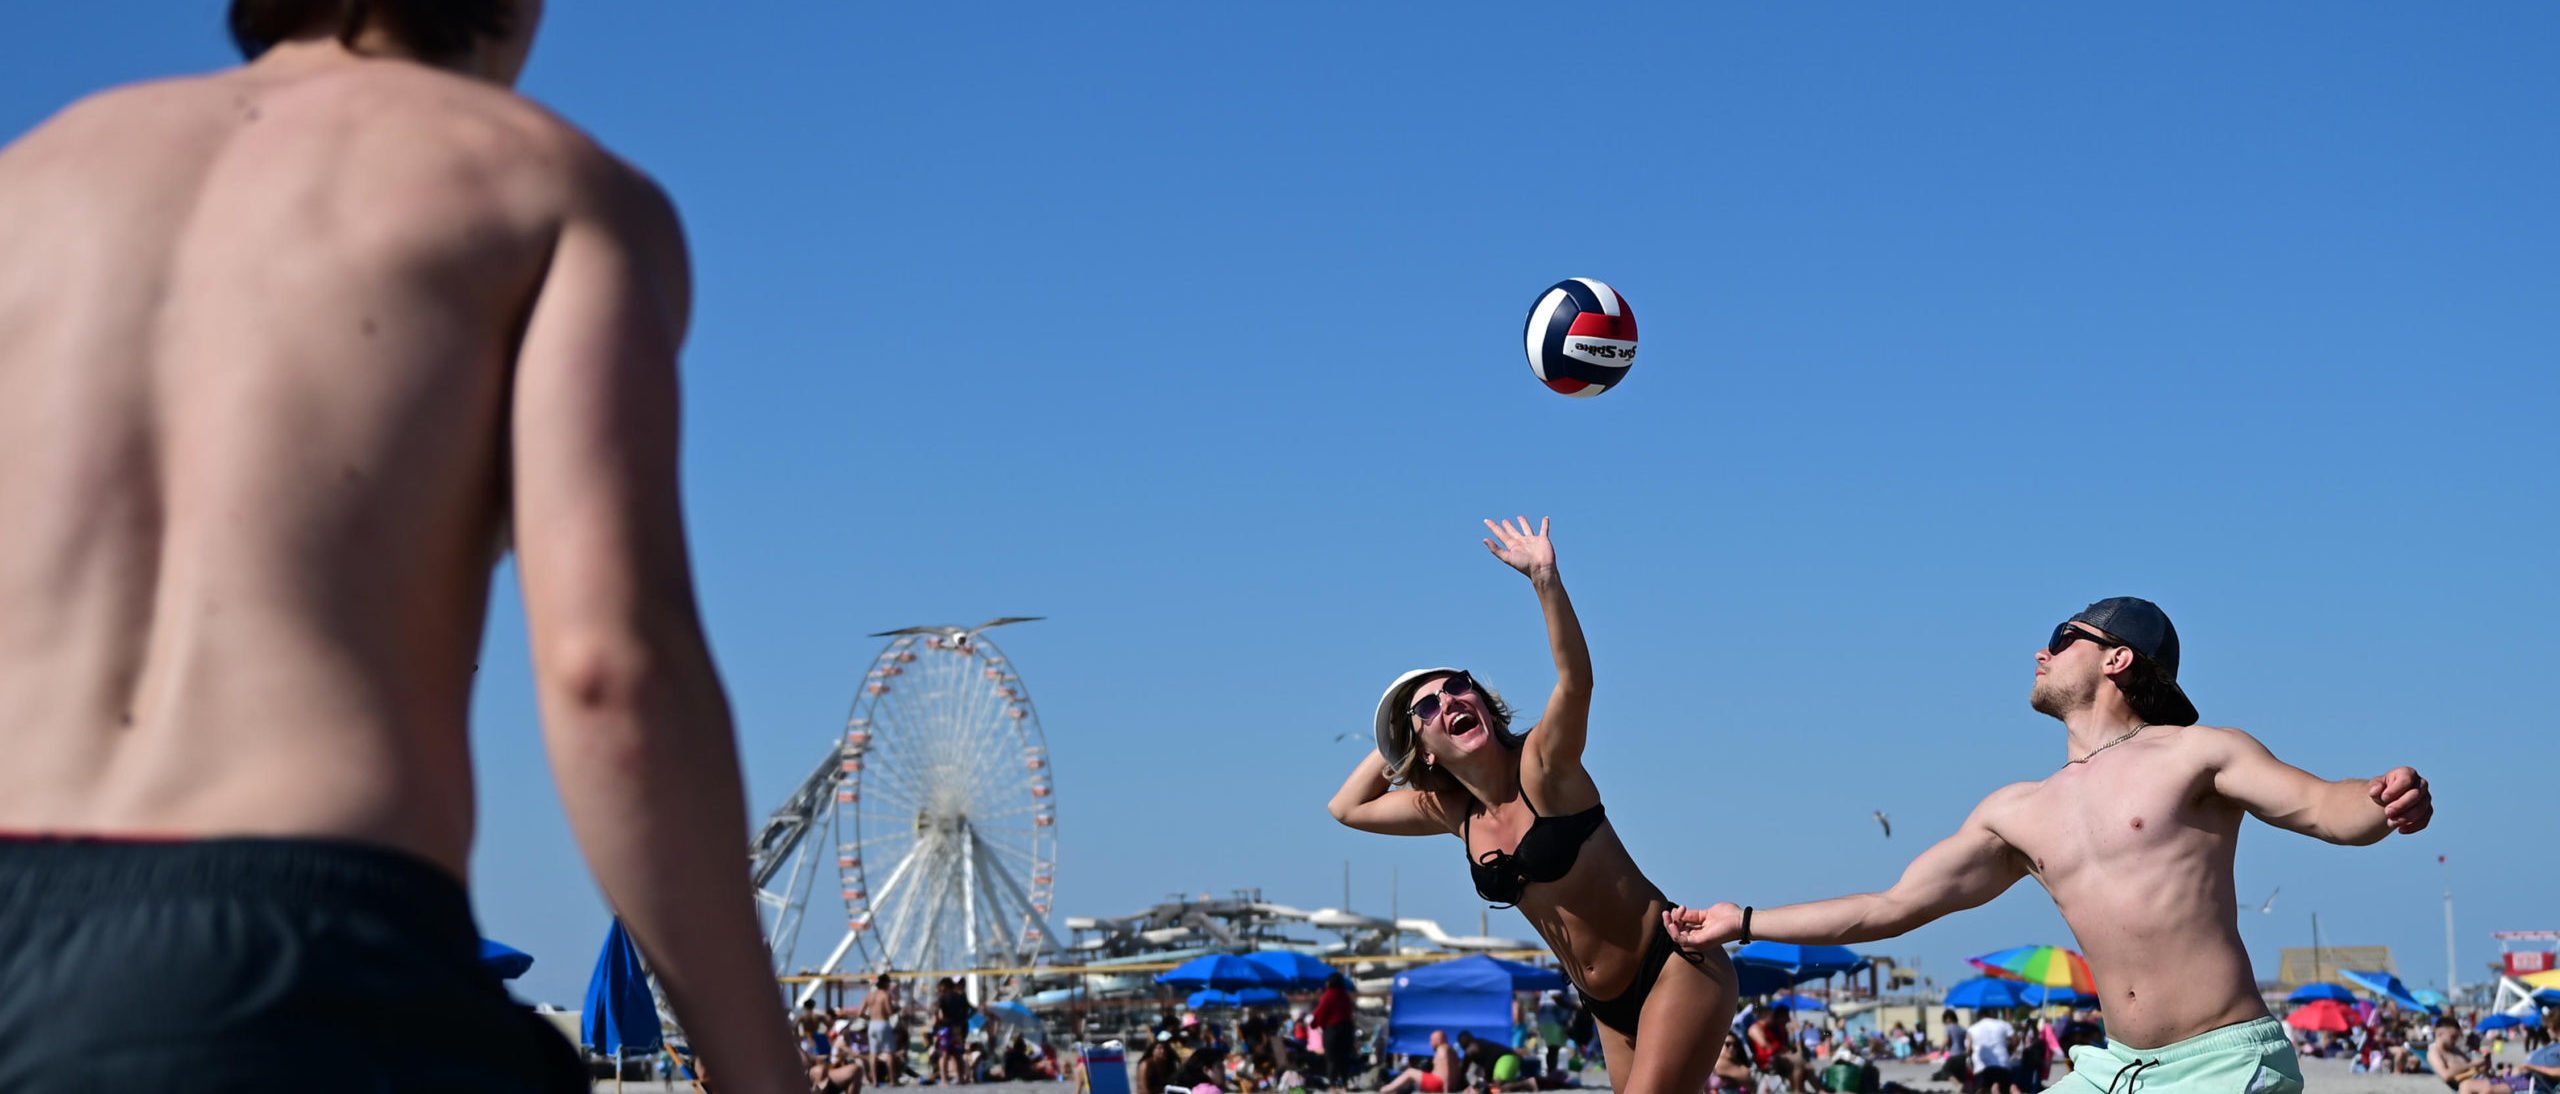 Young adults play volleyball on the beach on May 30, 2022 in Wildwood, New Jersey as part of Memorial Day events Image not from story. (Photo by Mark Makela/Getty Images)